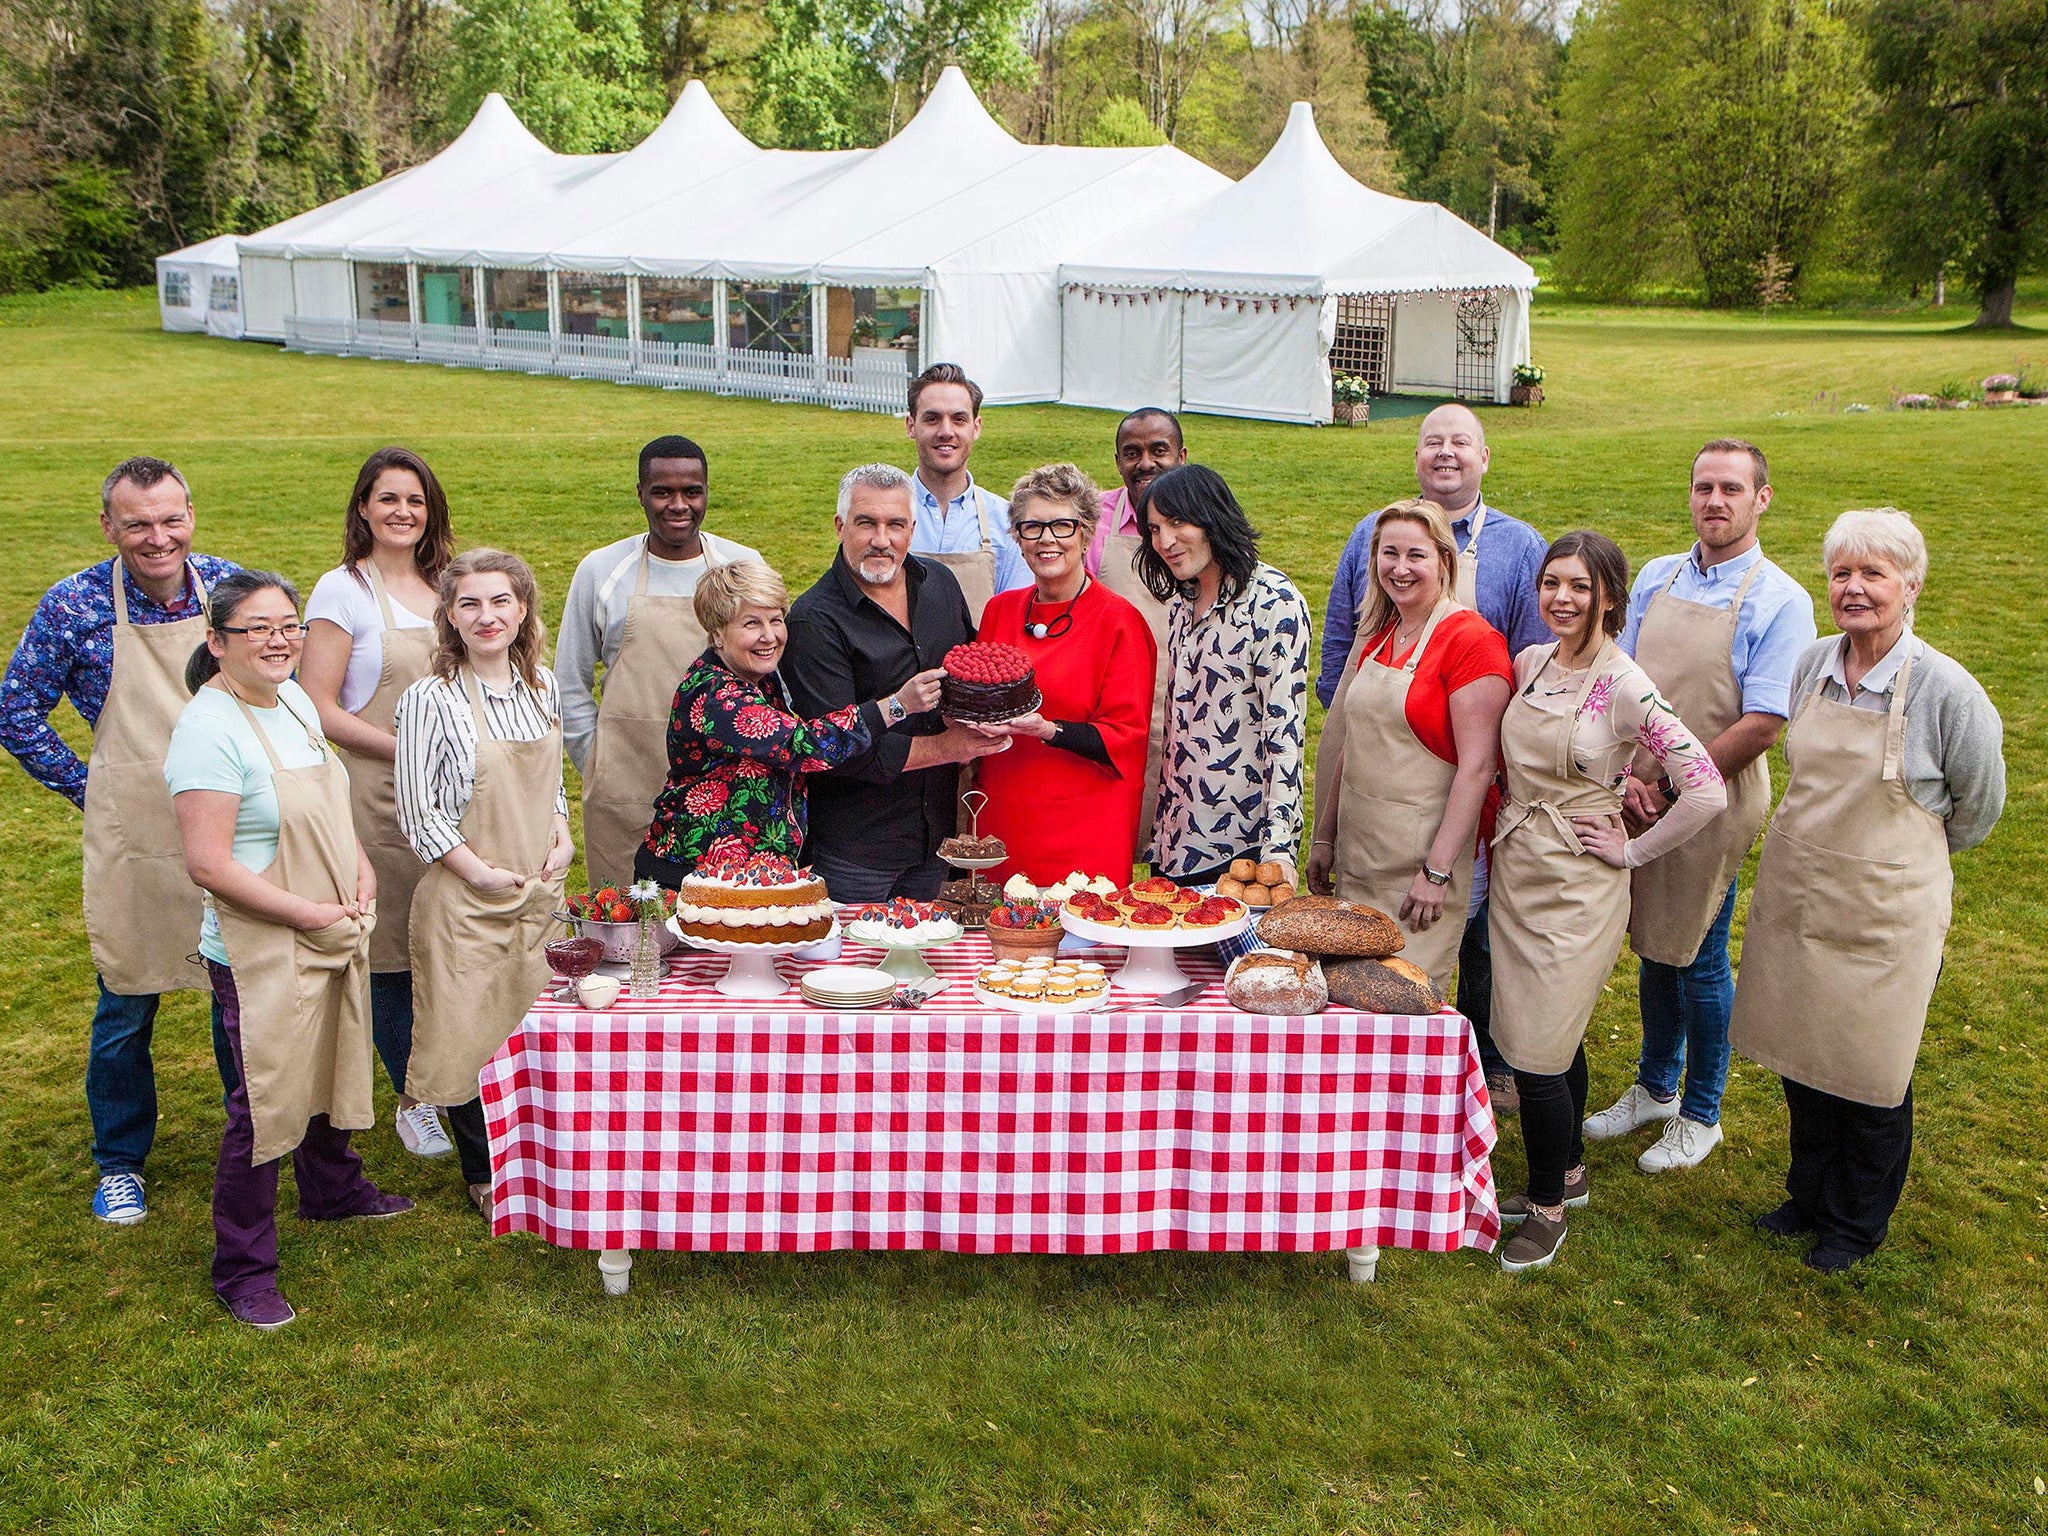 Flo was sent home on Bread Week of The Great British Bake Off, much to fans' dismay